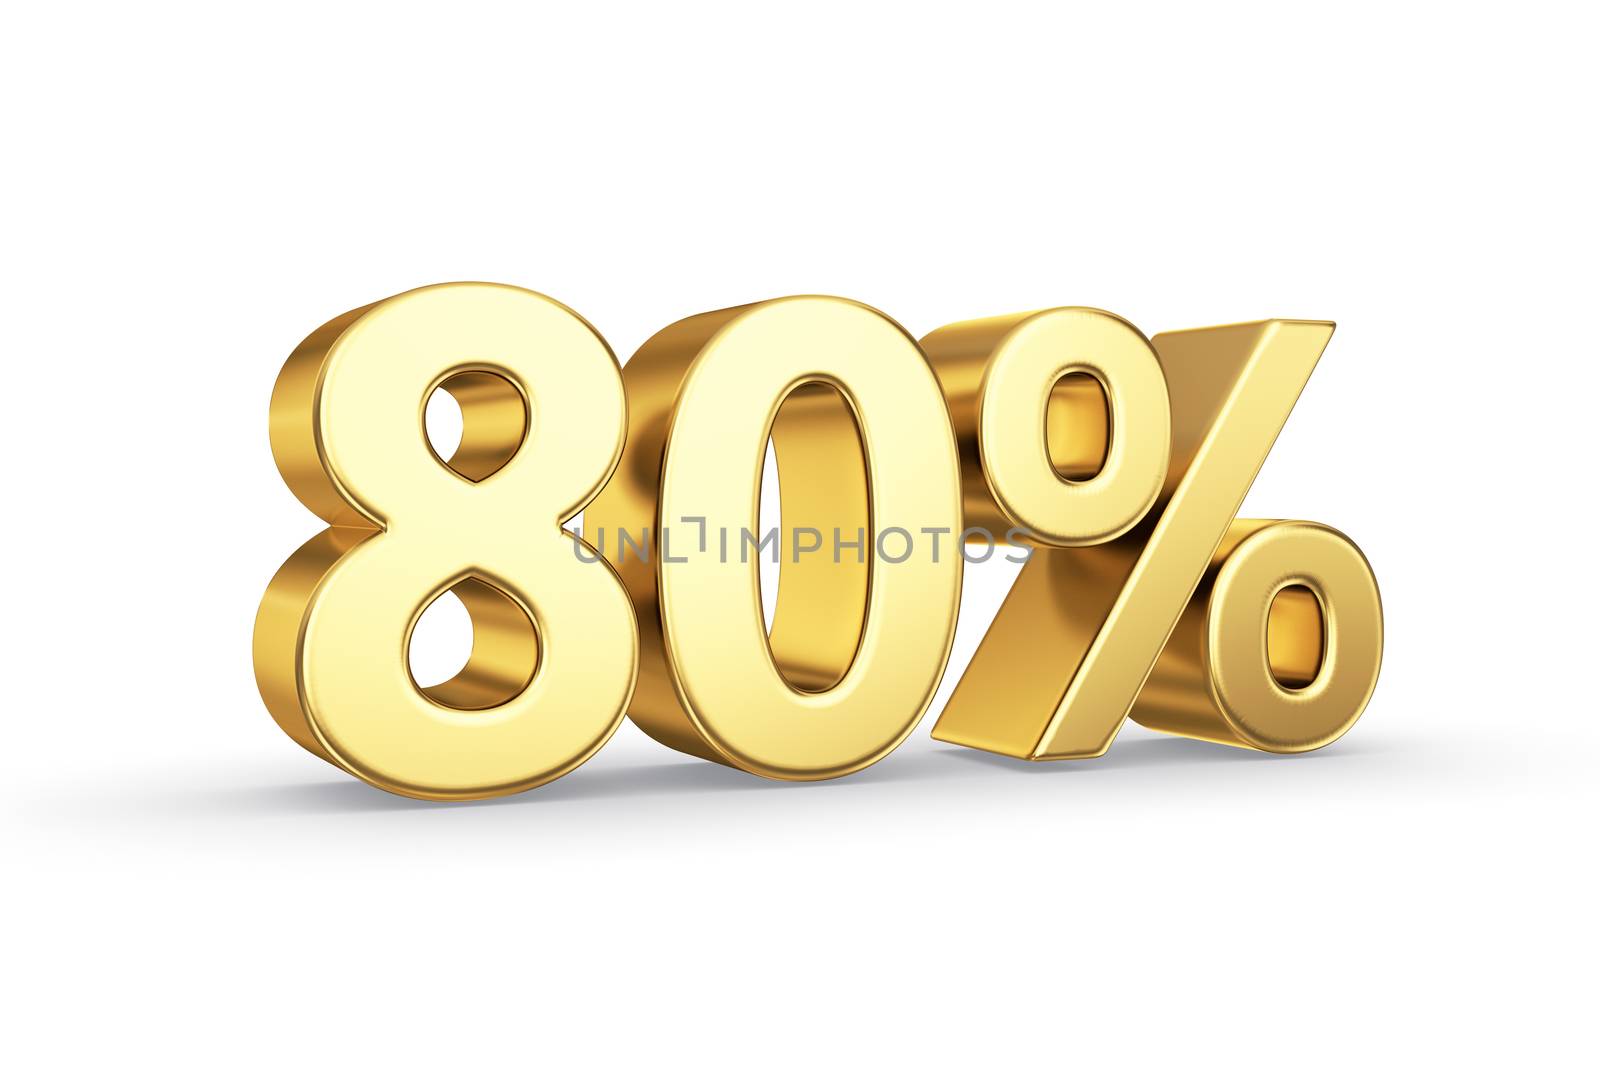 golden 3D percentage icon - isolated with clipping path